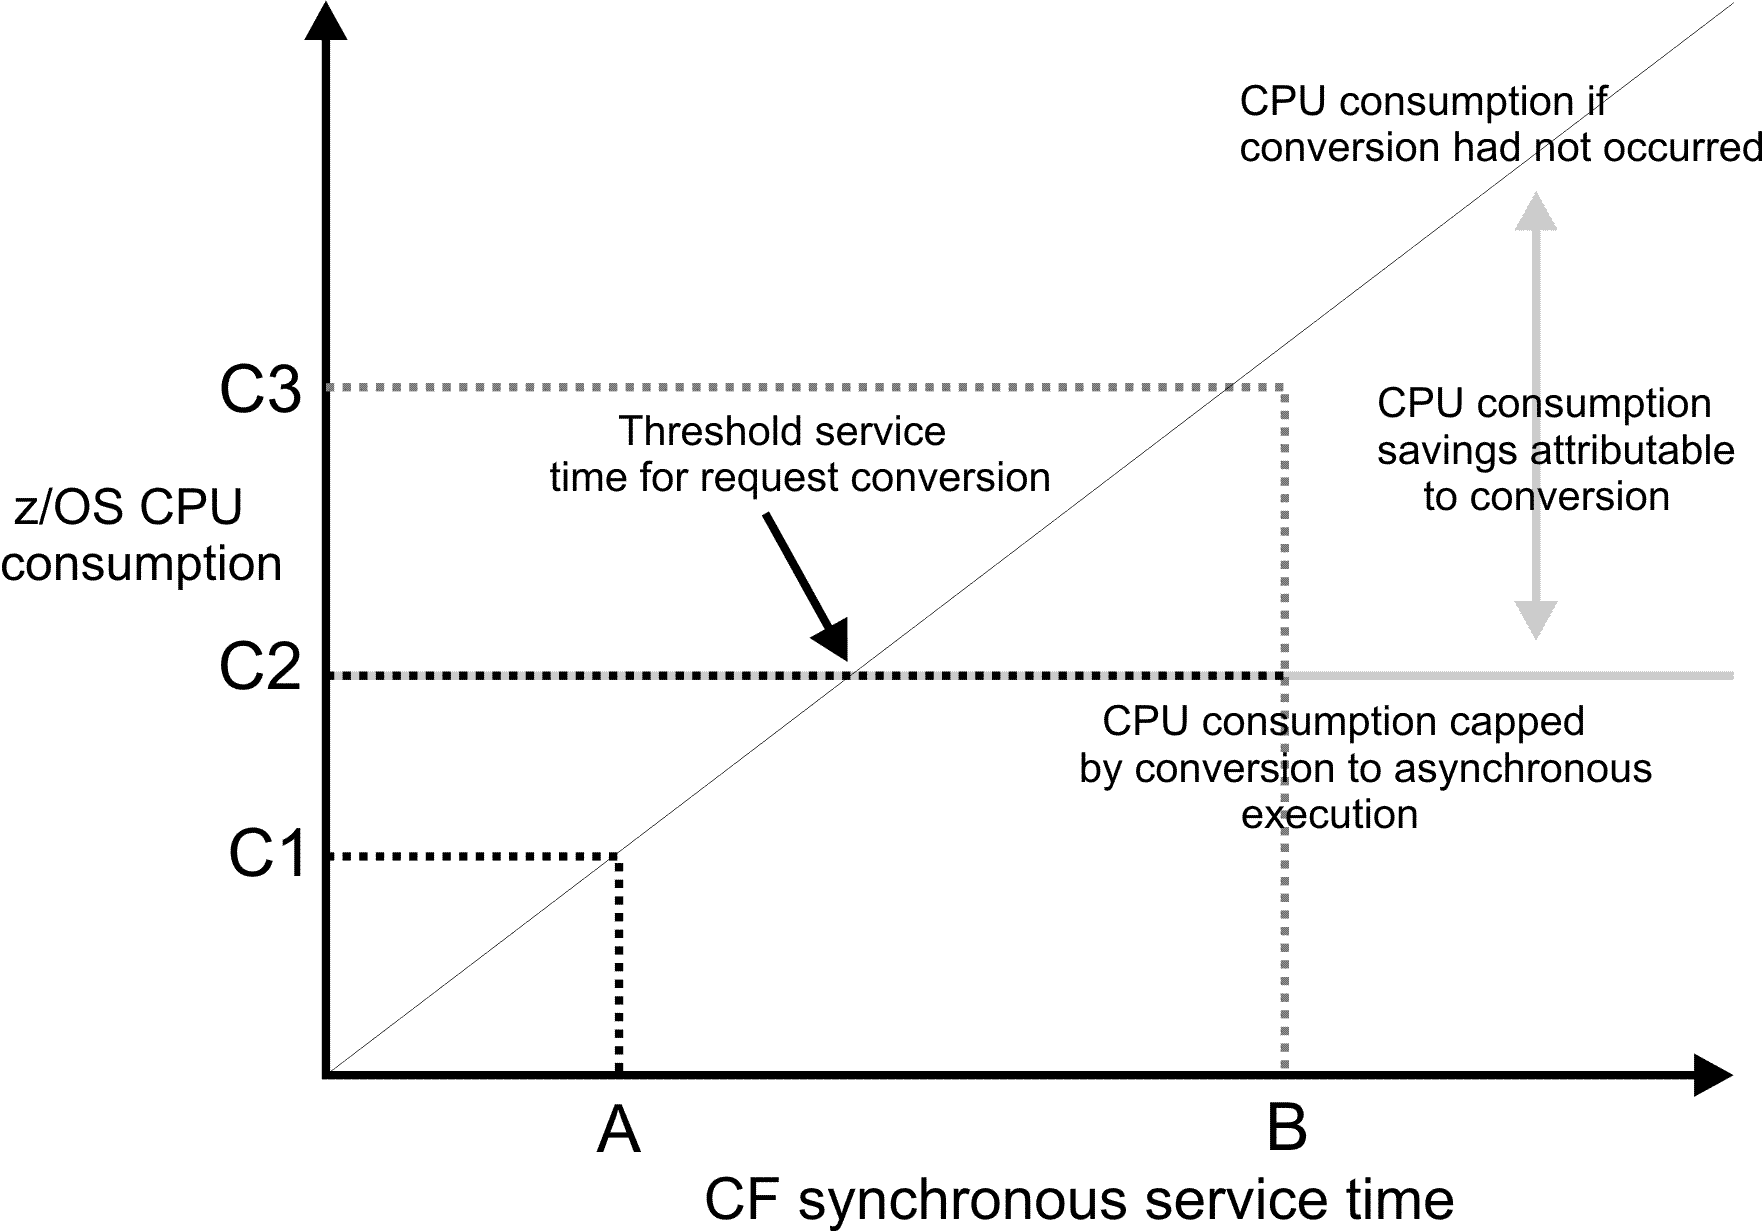 Graphic showing CF synchronous service time